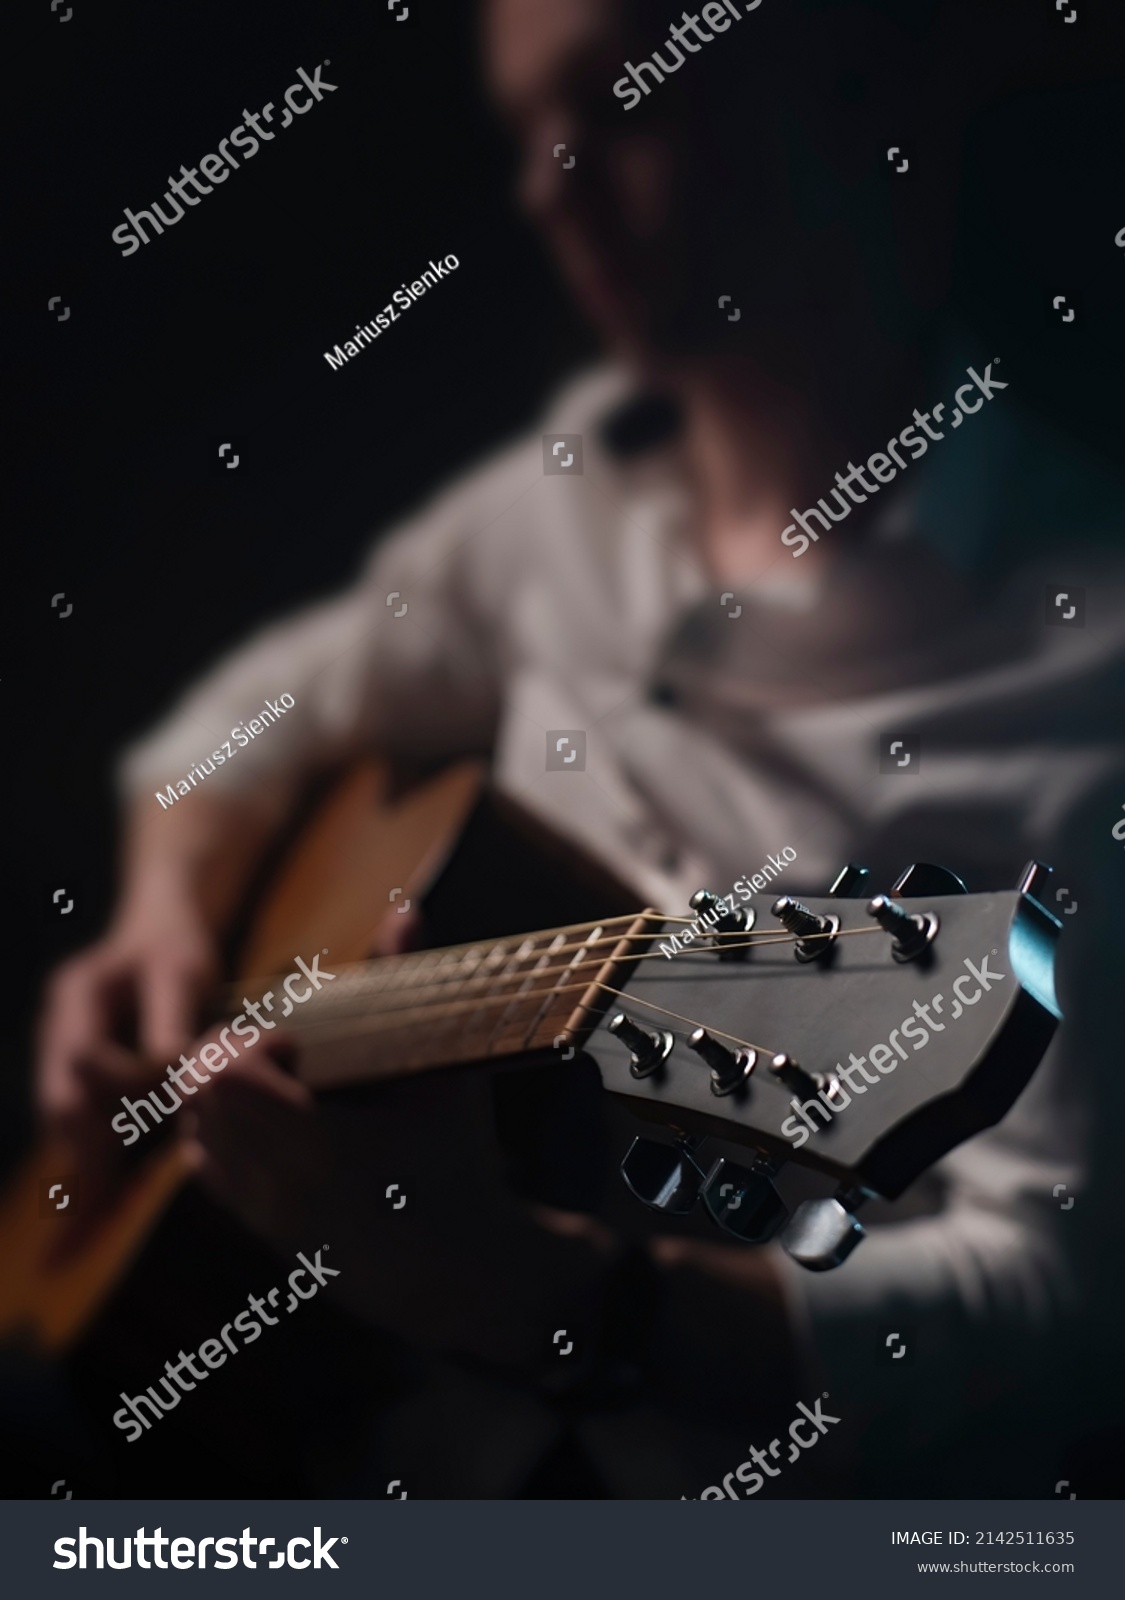 The guitarist is playing acoustic guitar shown in small depth of field where the focus is on the headstock. Dark and moody. #2142511635